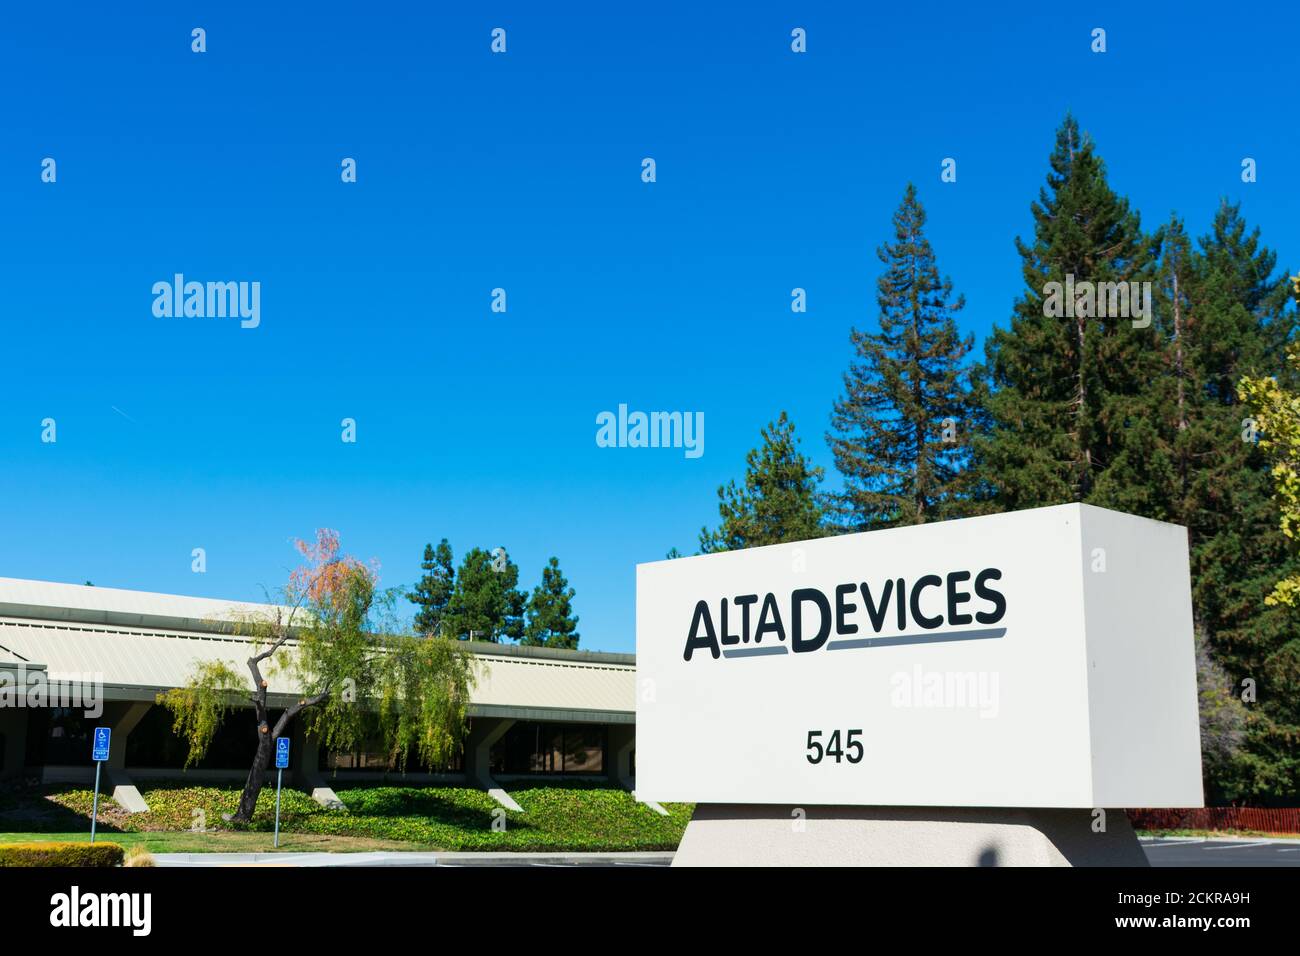 Alta Devices sign at private solar energy company headquarters in Silicon Valley - Sunnyvale, California, USA - October 2019 Stock Photo